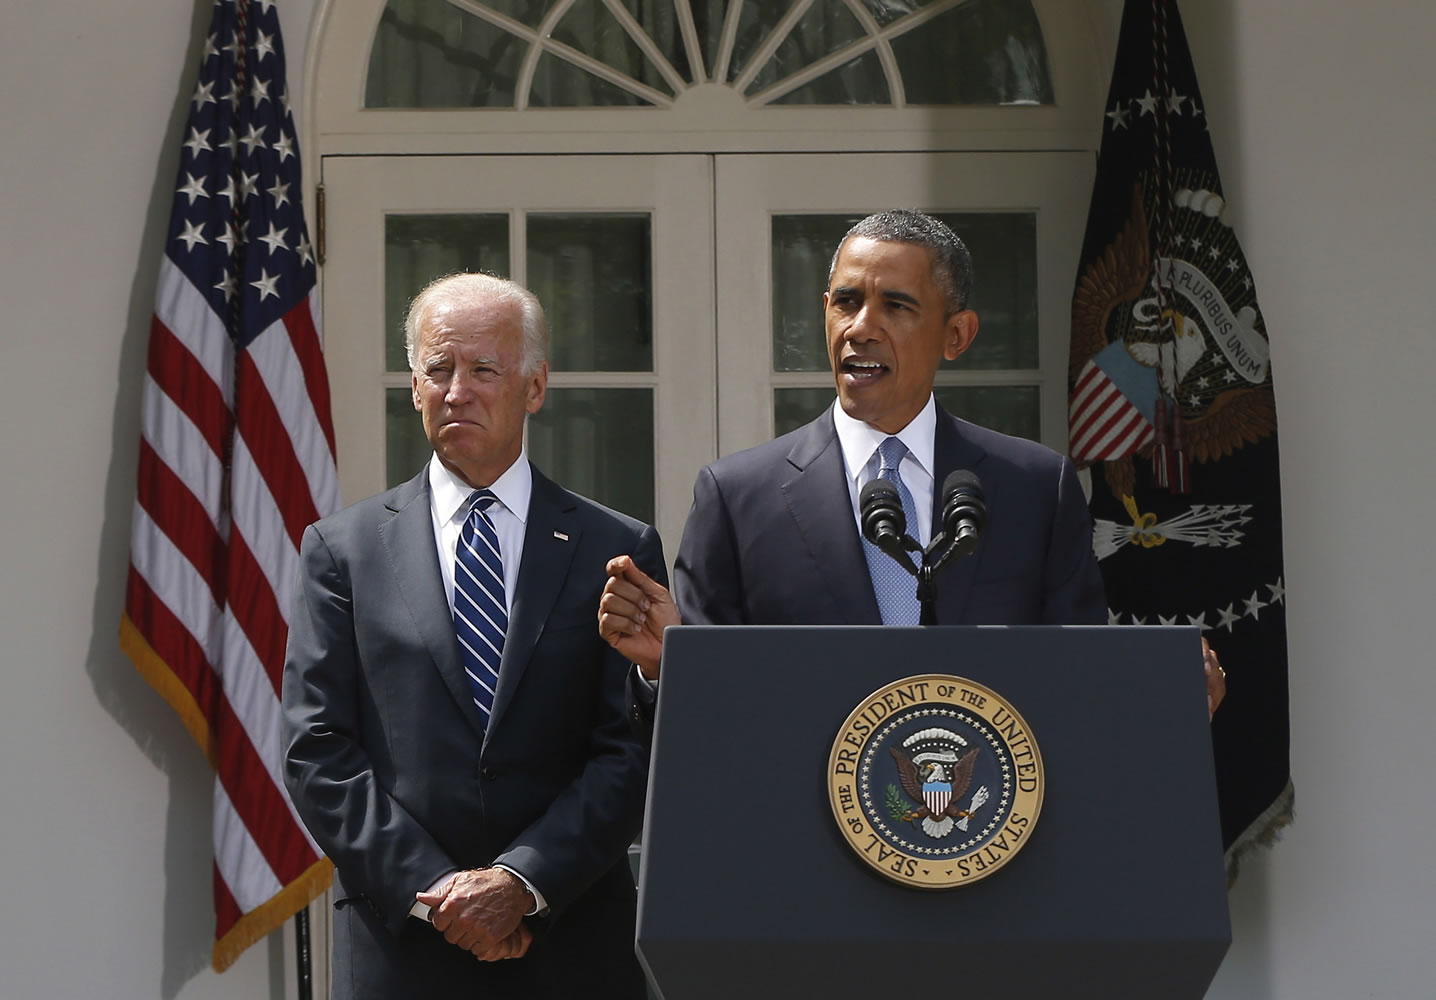 President Barack Obama stands with Vice President Joe Biden on Saturday as he makes a statement about the crisis in Syria in the Rose Garden at the White House in Washington.